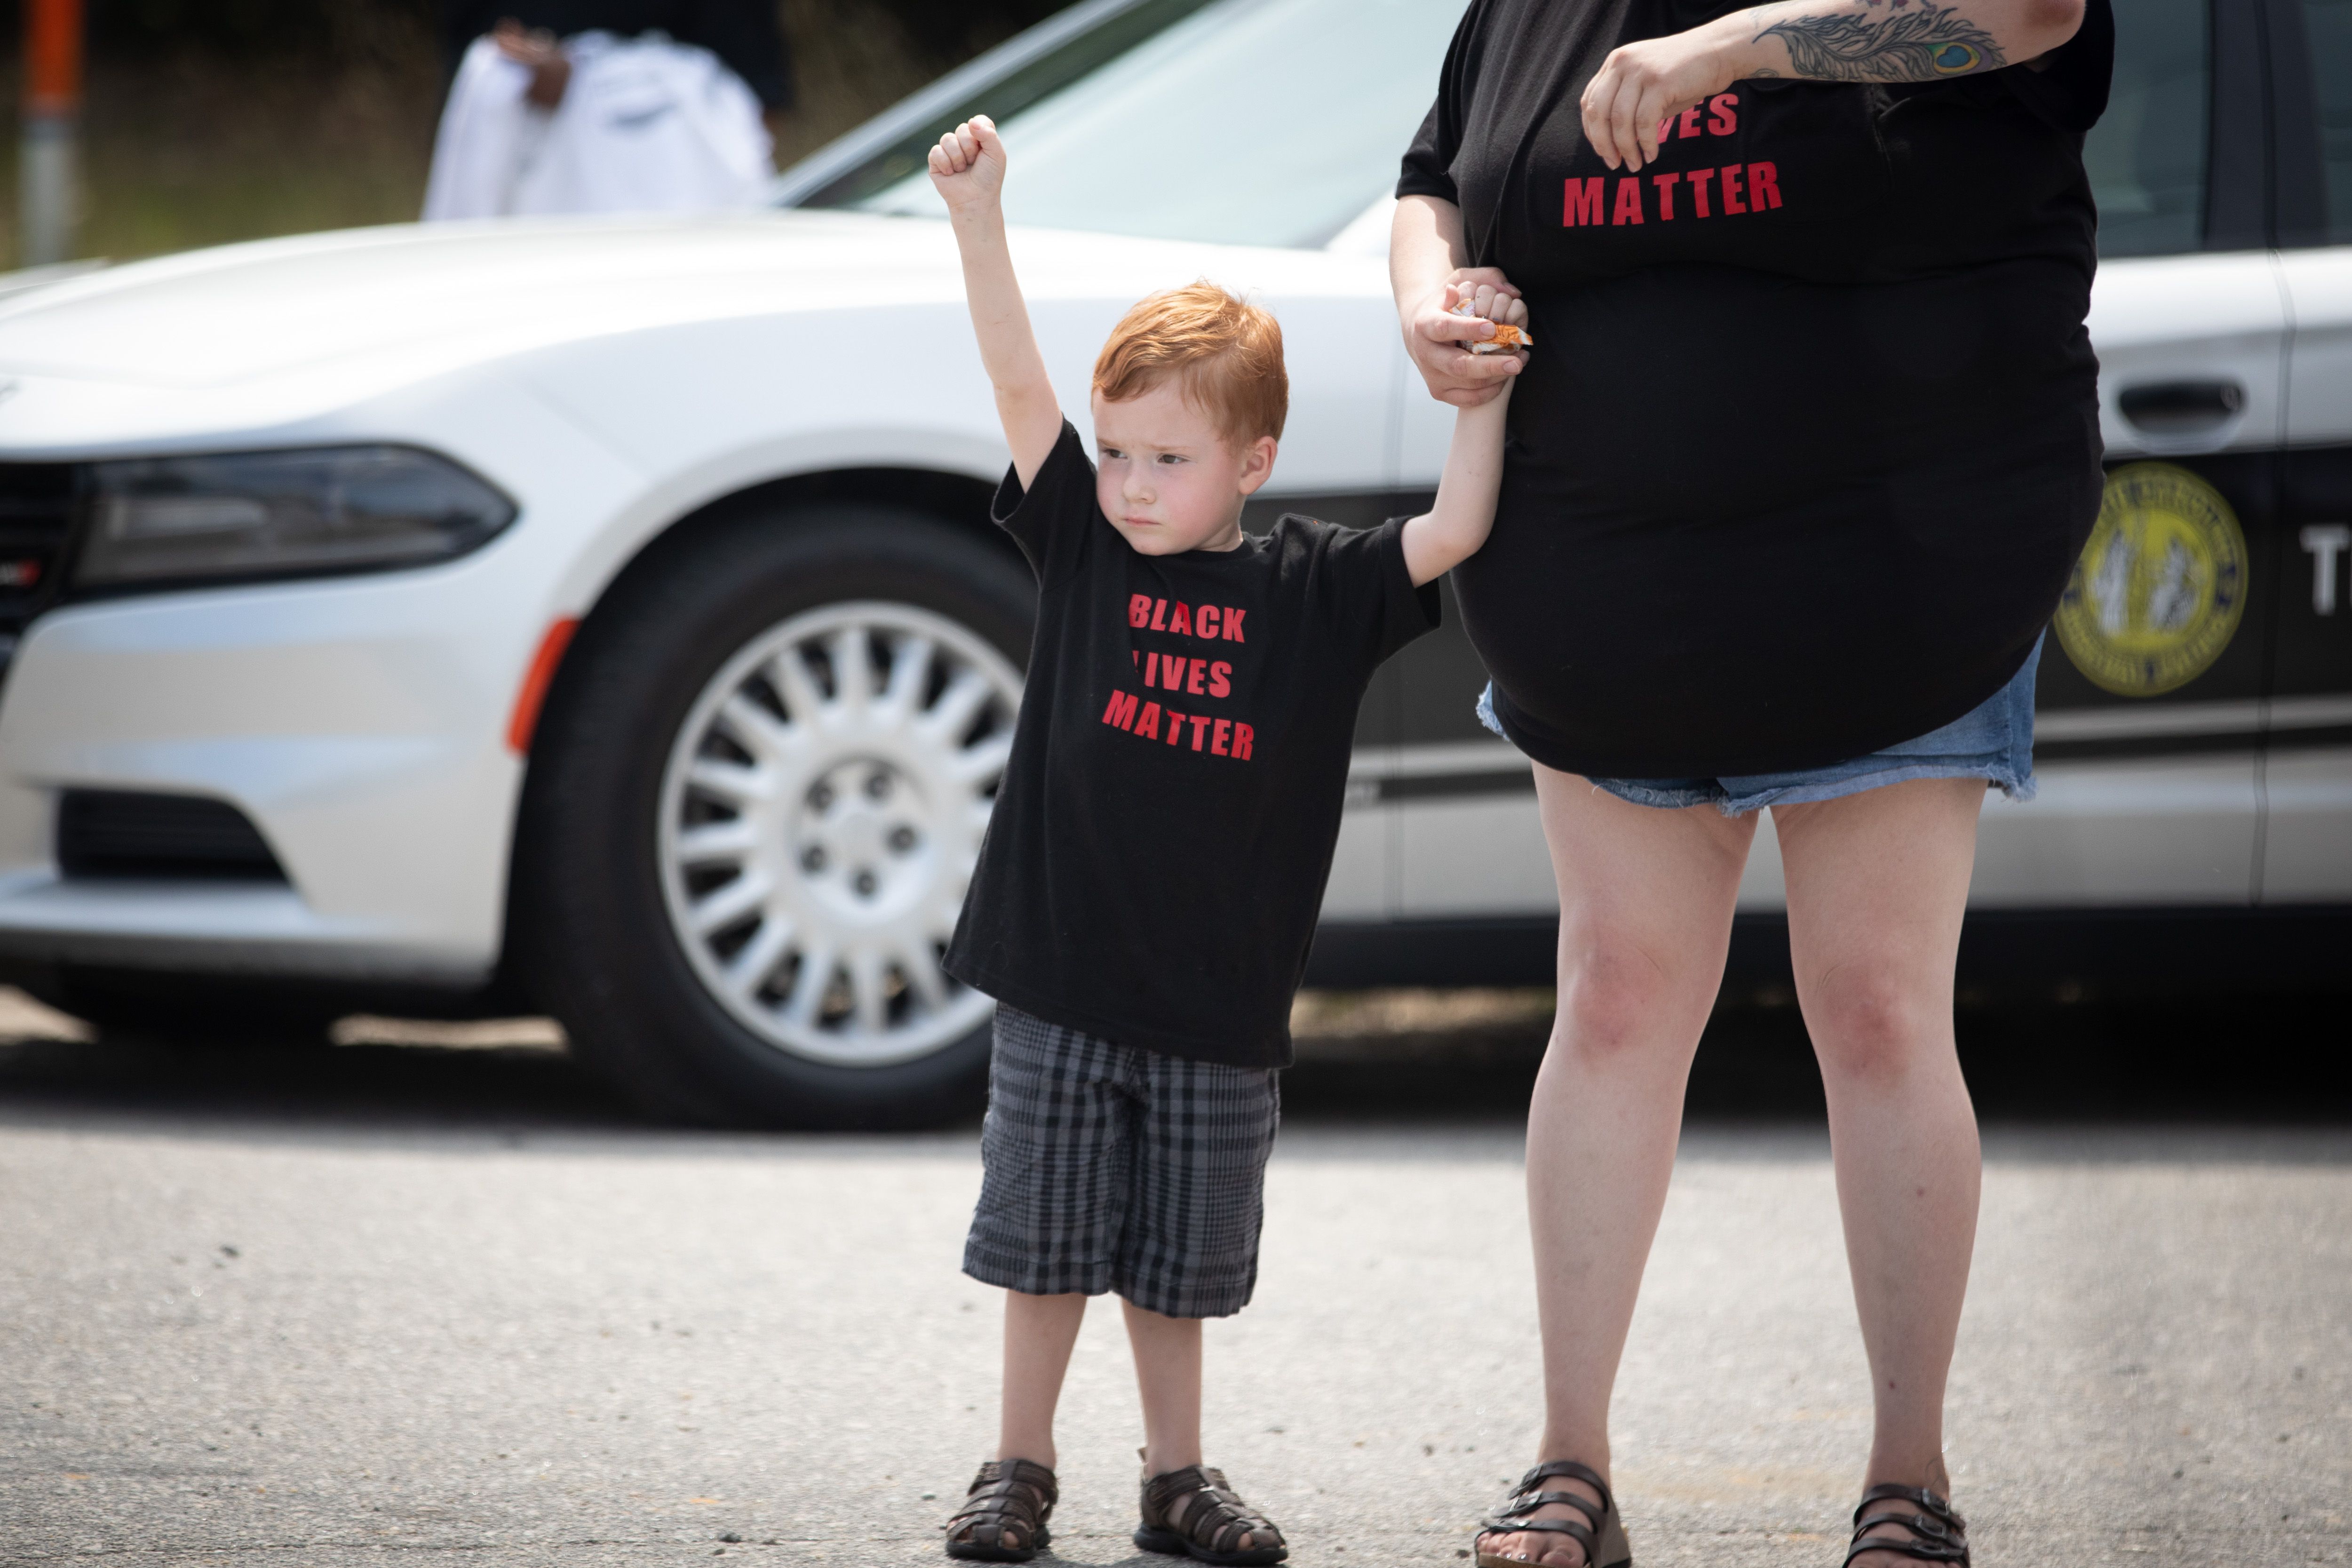 A boy raises a fist as a group of bikers arrive to pay their respects to George Floyd